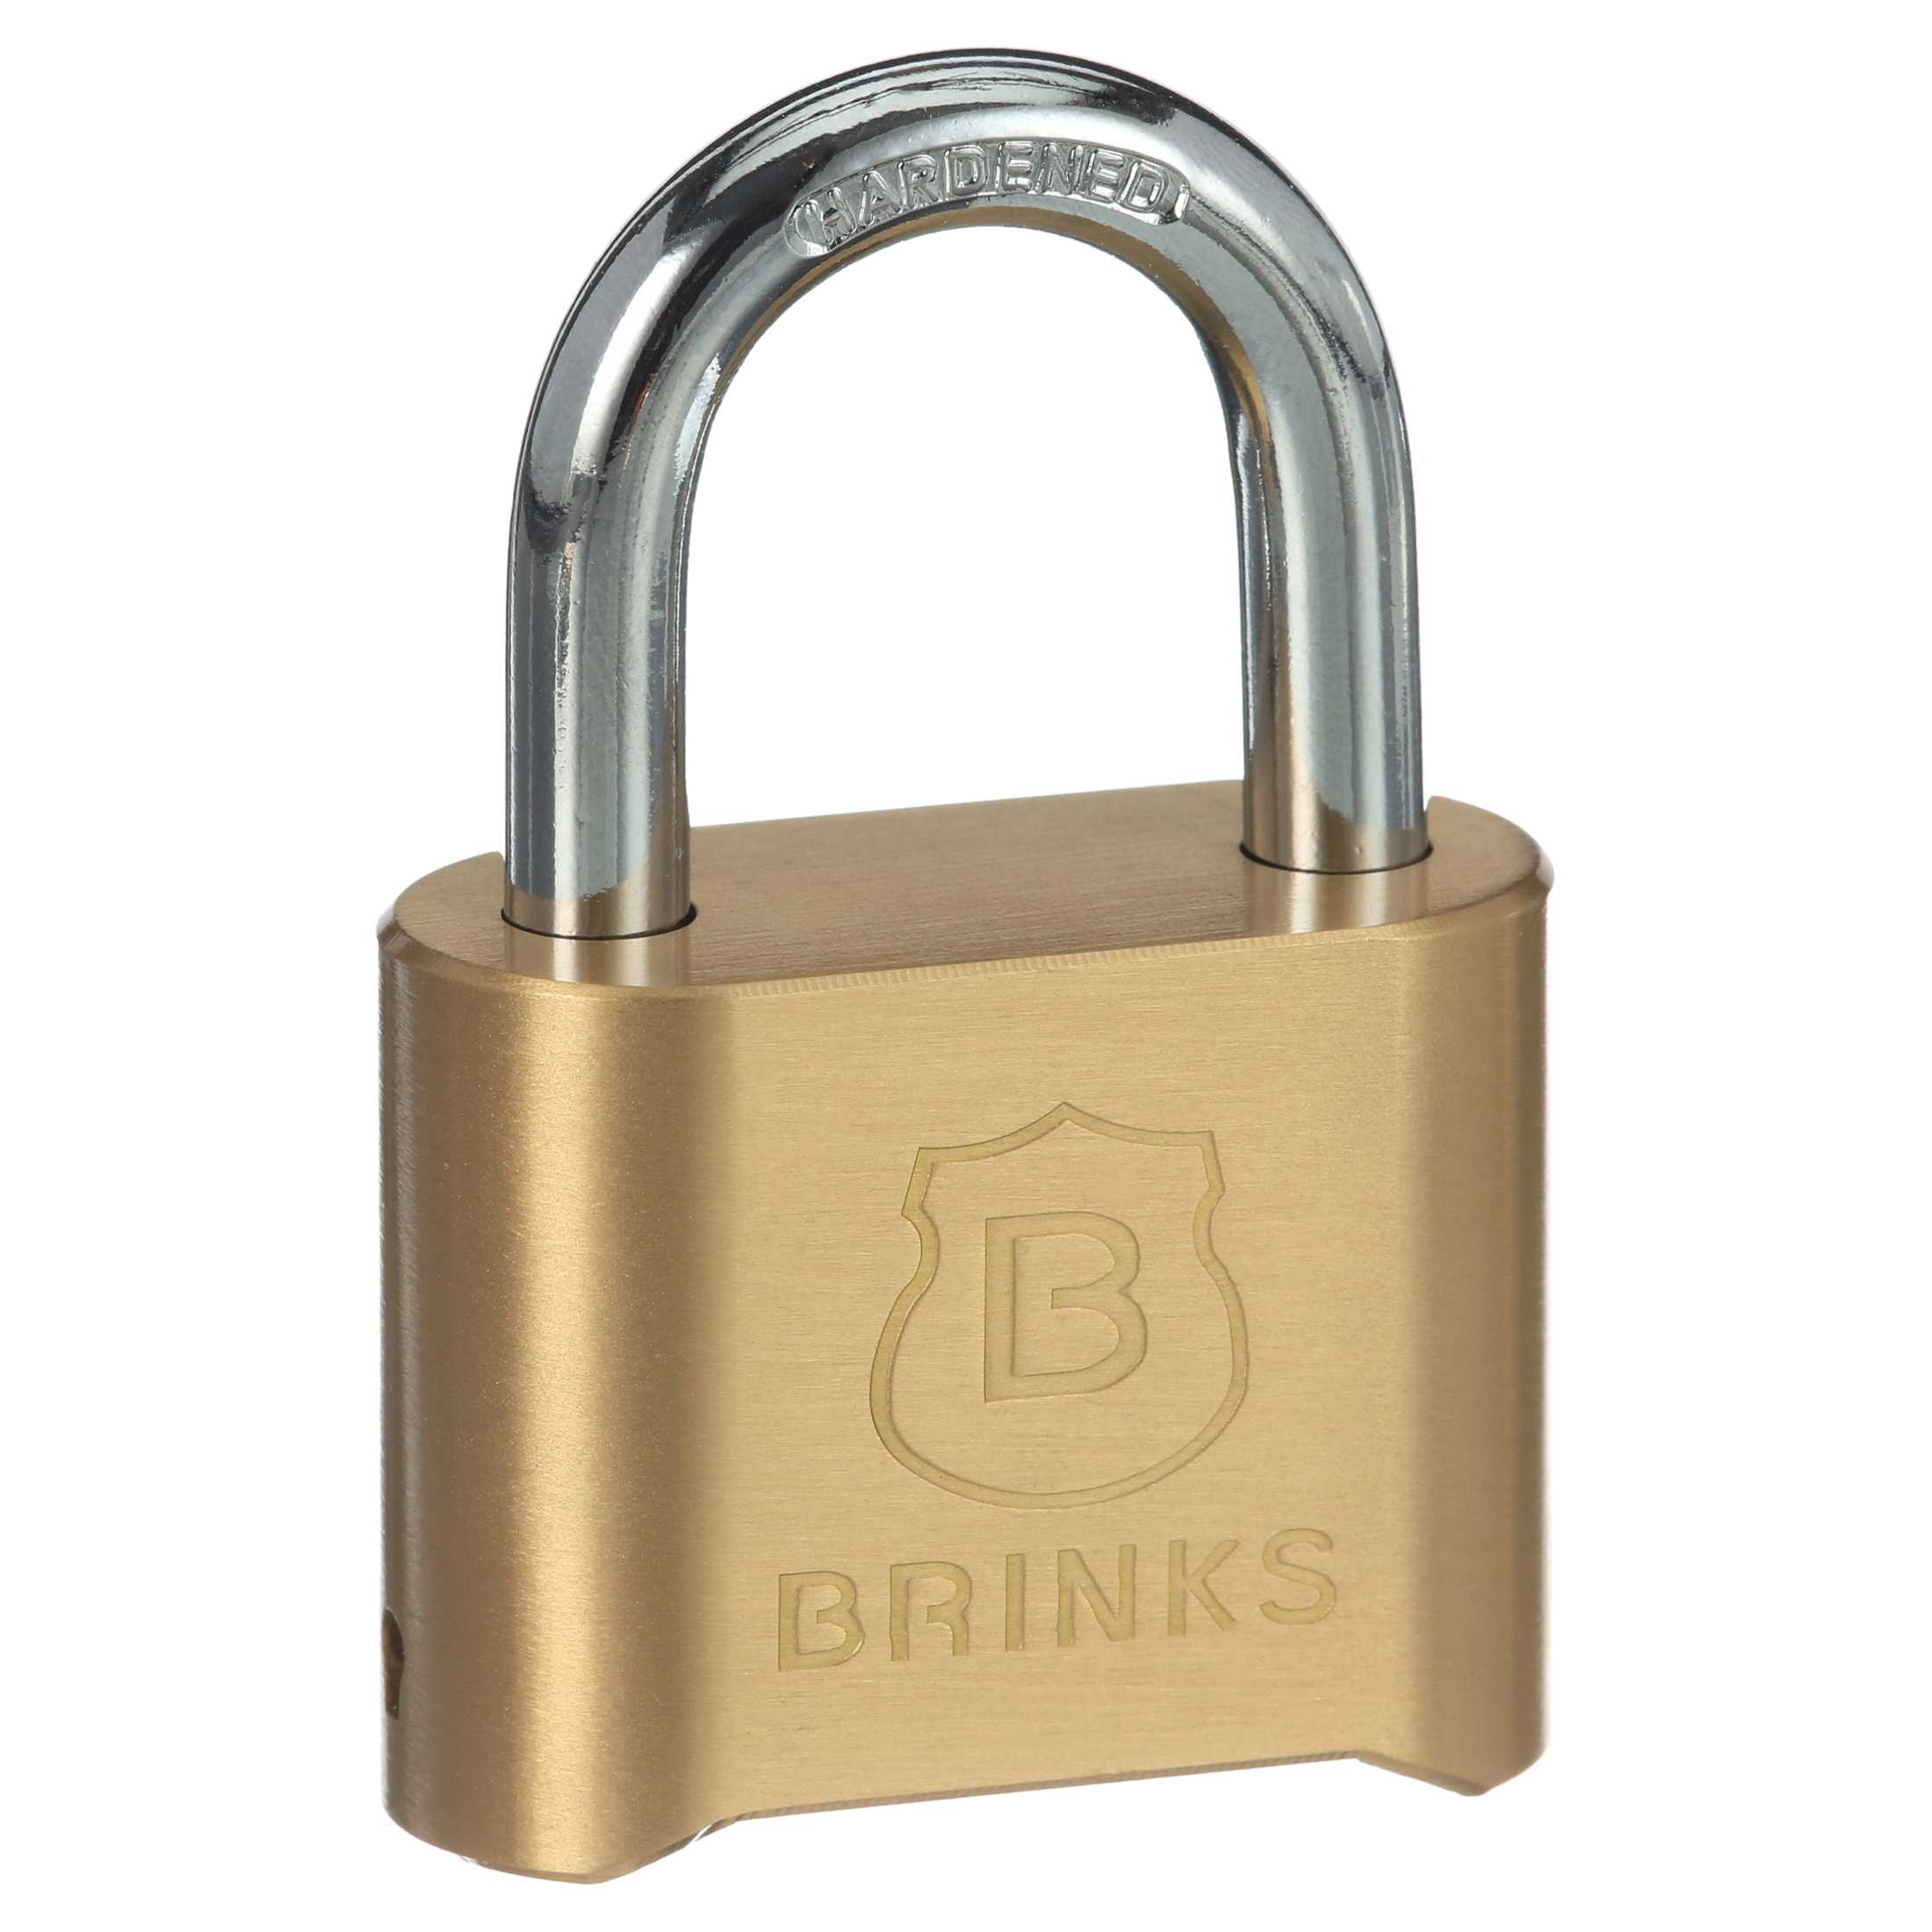 Brinks Solid Brass 50mm Resettable Combination Padlock with 1in Shackle - image 2 of 7